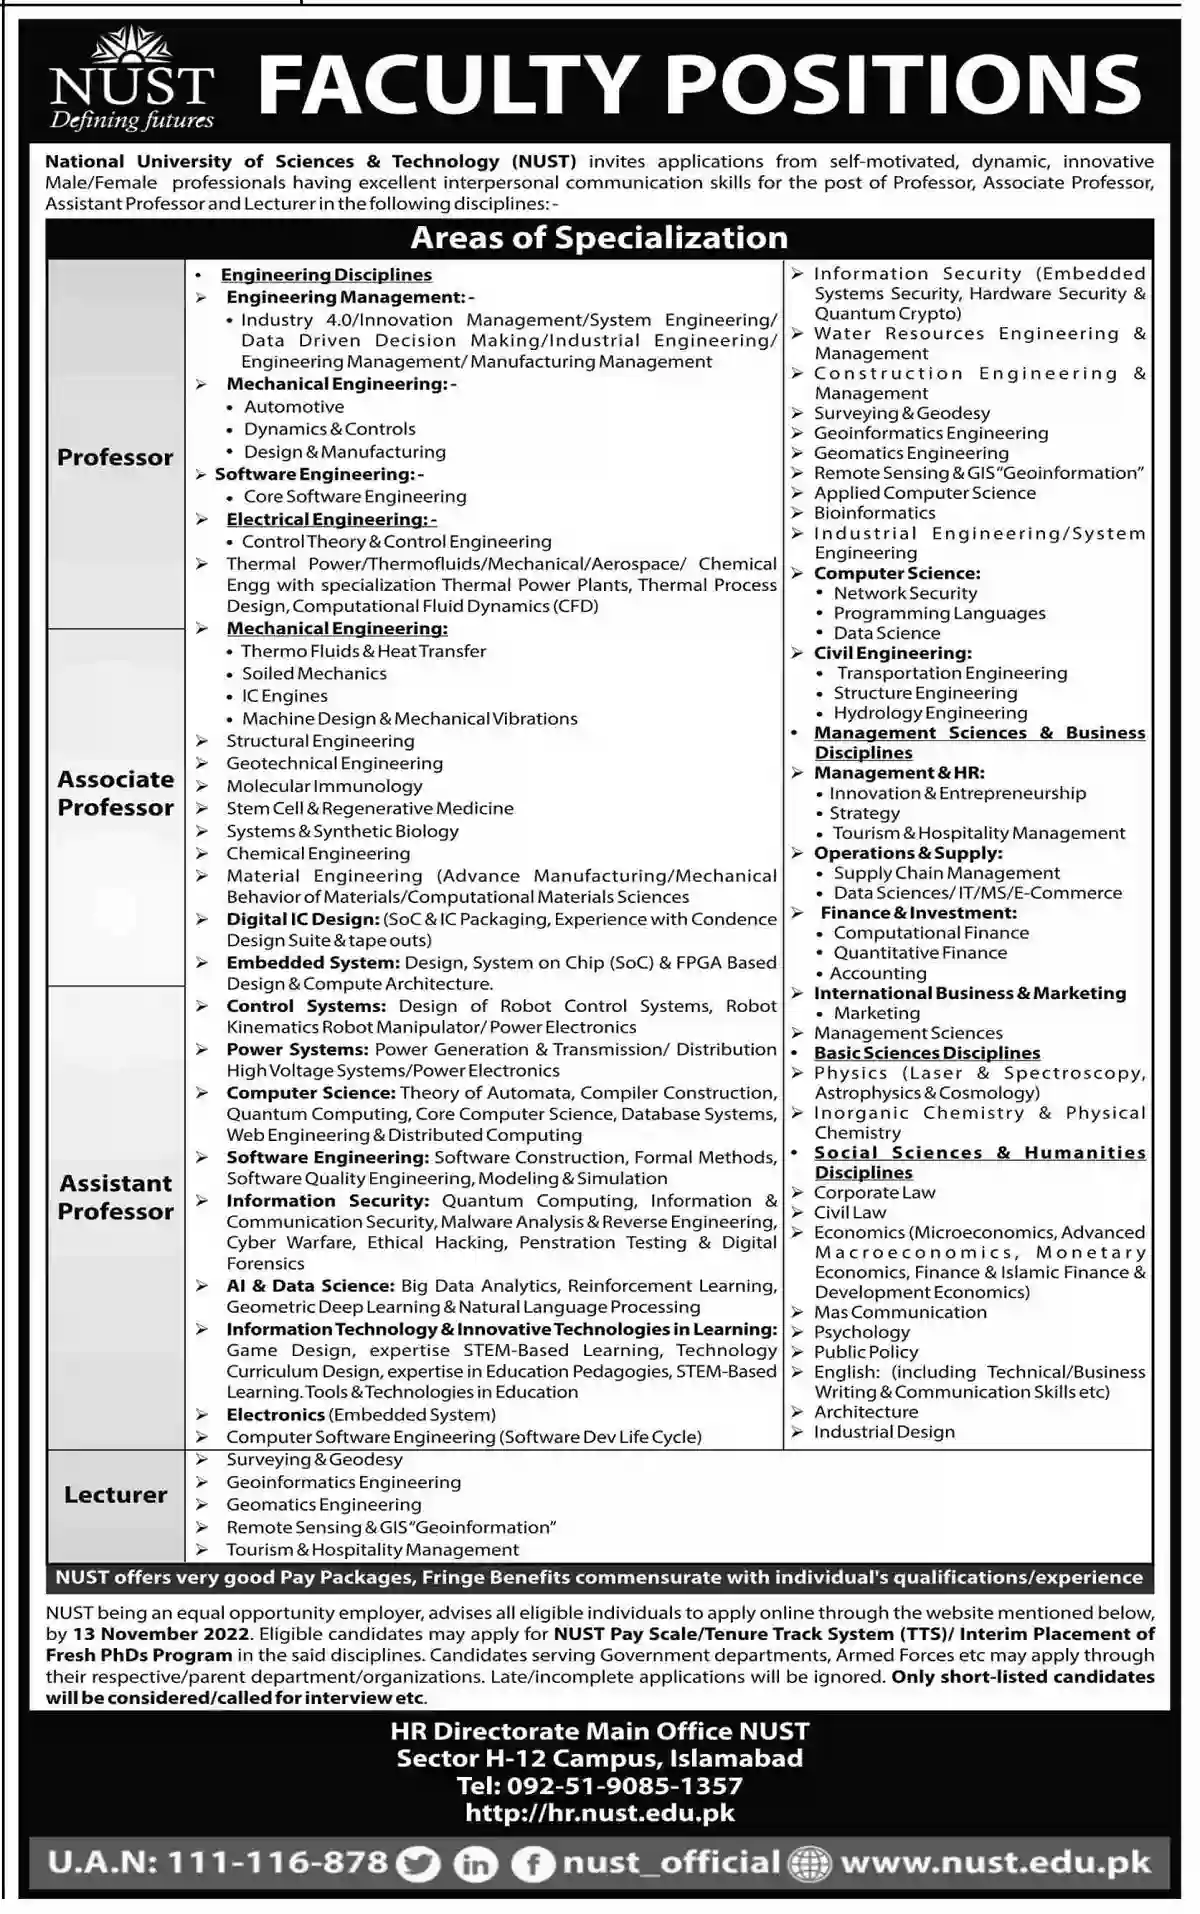 National University of Science and Technology NUST Faculty Jobs 2022